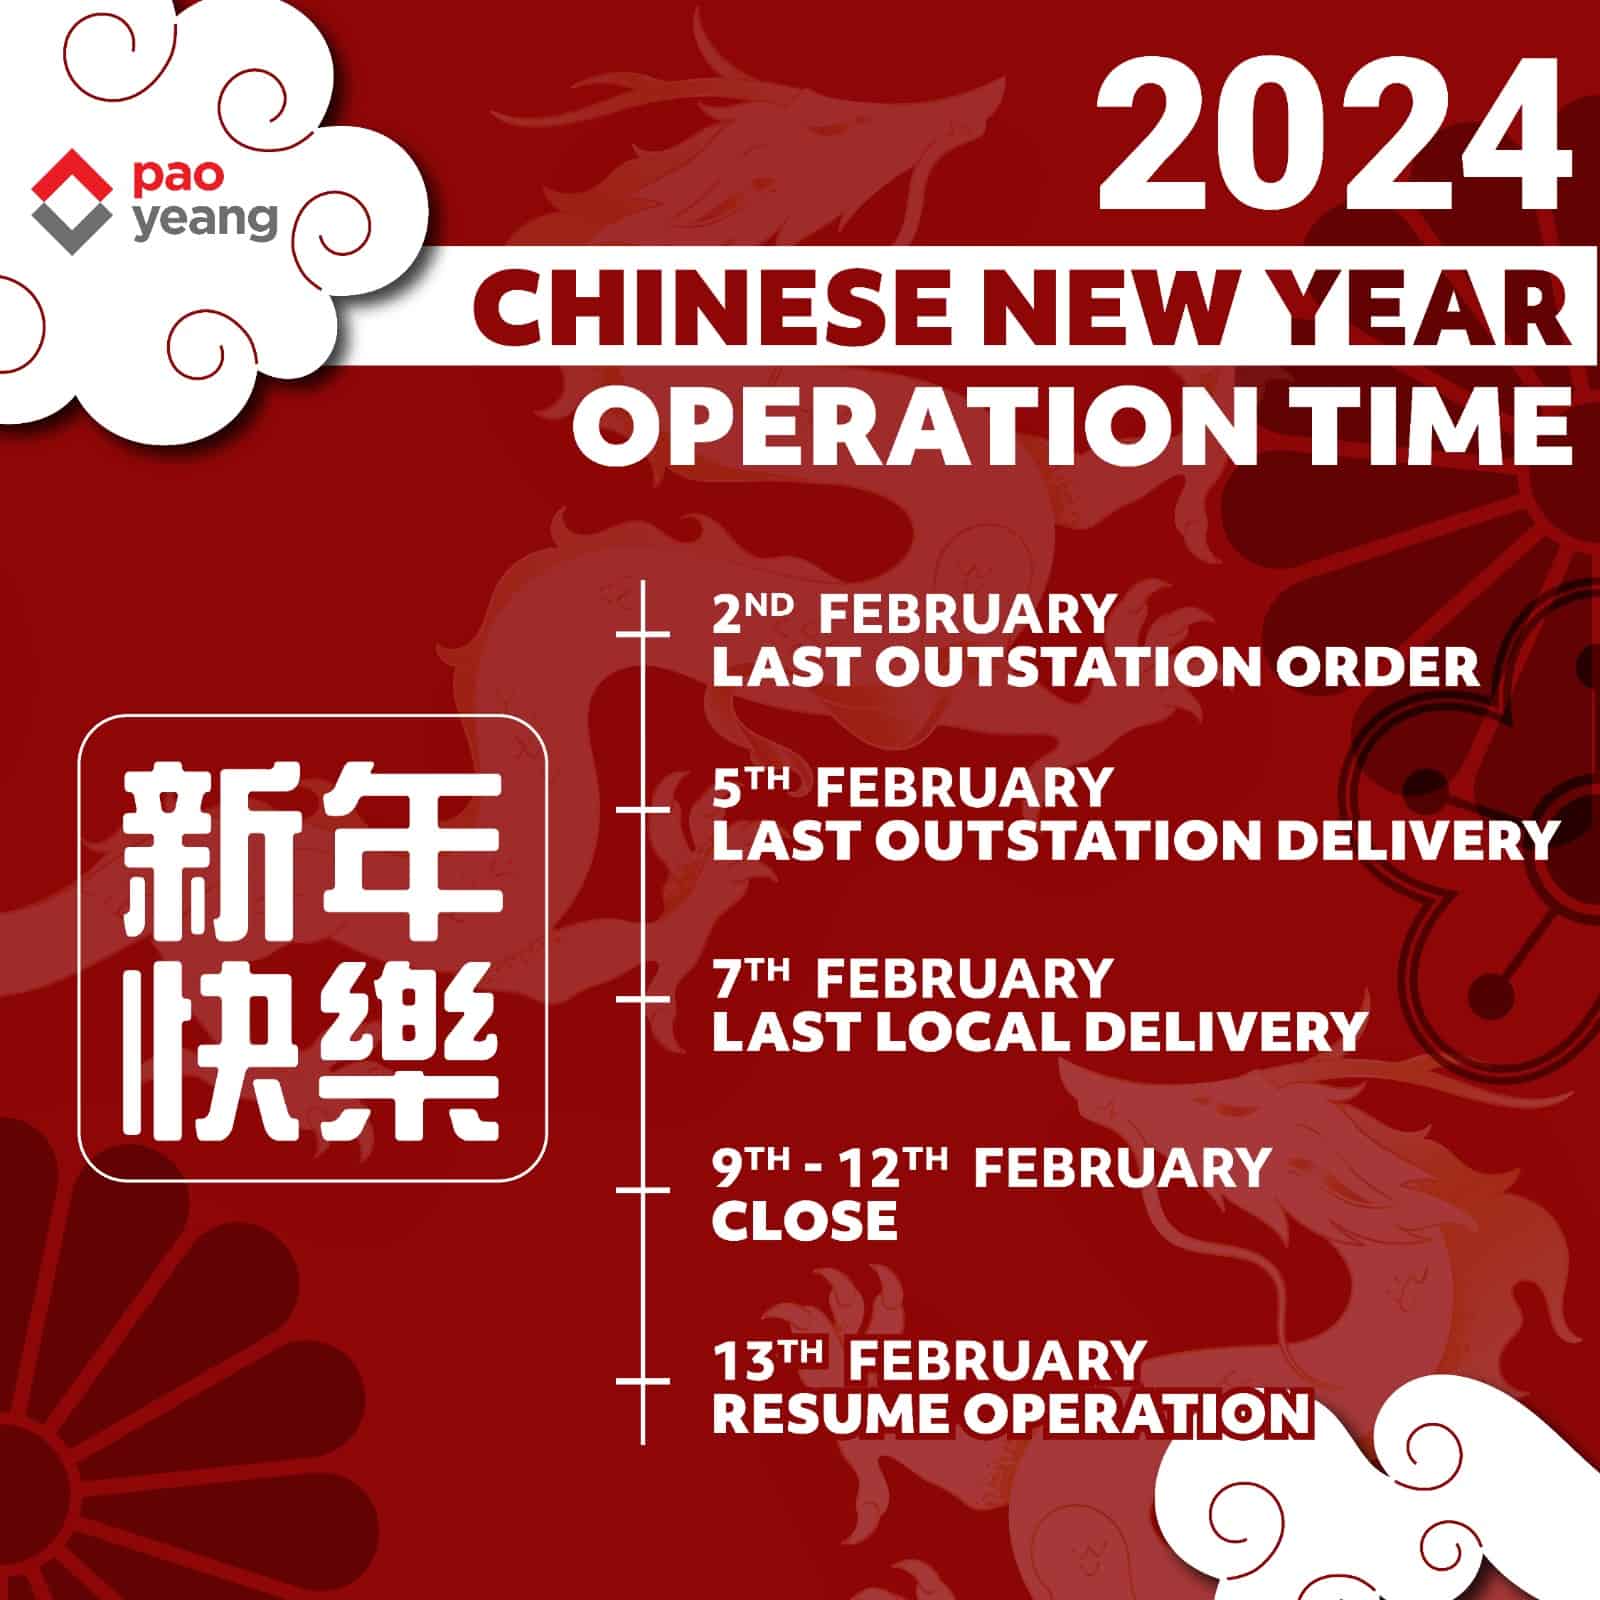 Holiday Notice - Happy Chinese New Year 2024